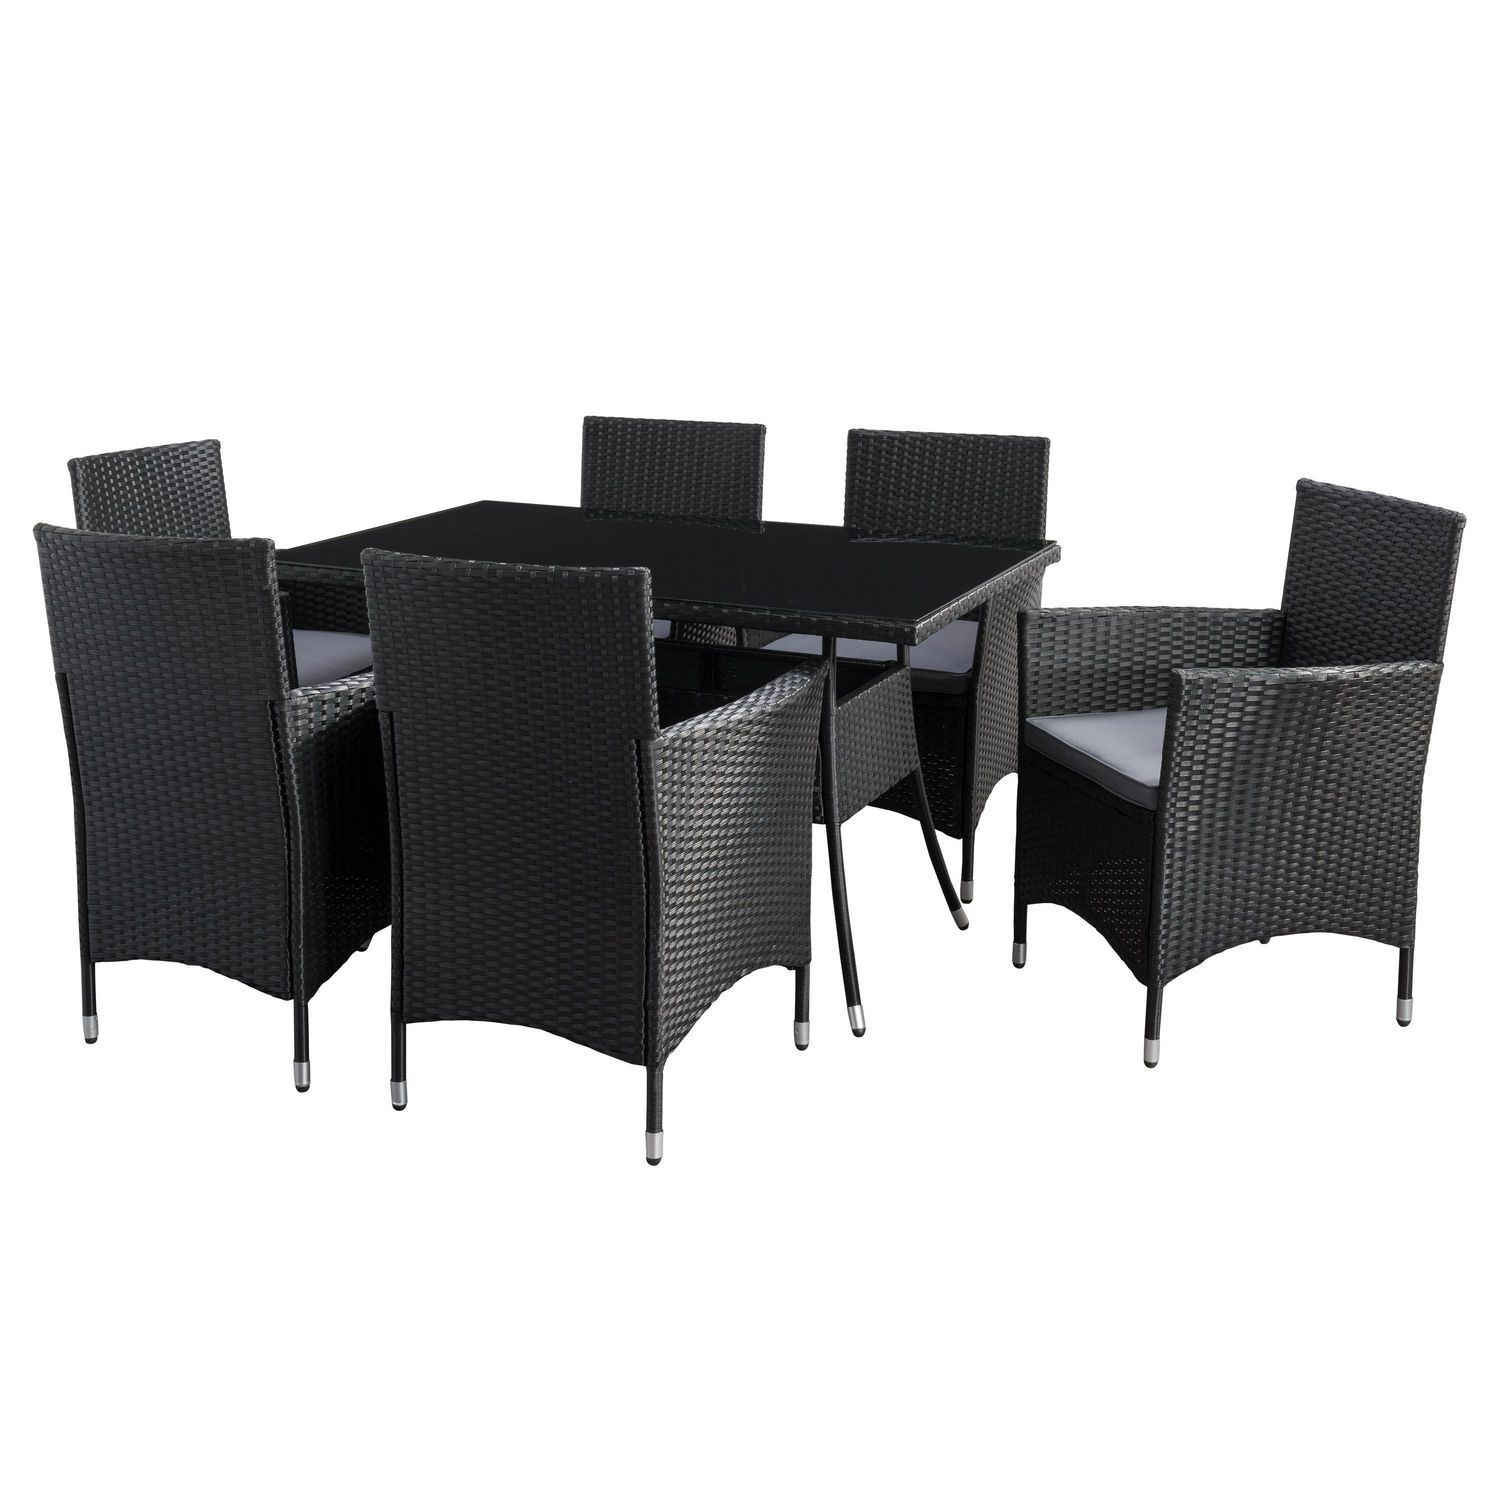 Corliving Parksville 7 Piece Rectangle Resin Wicker Patio Dining Set With Regard To Gray Wicker Rectangular Patio Dining Sets (View 10 of 15)